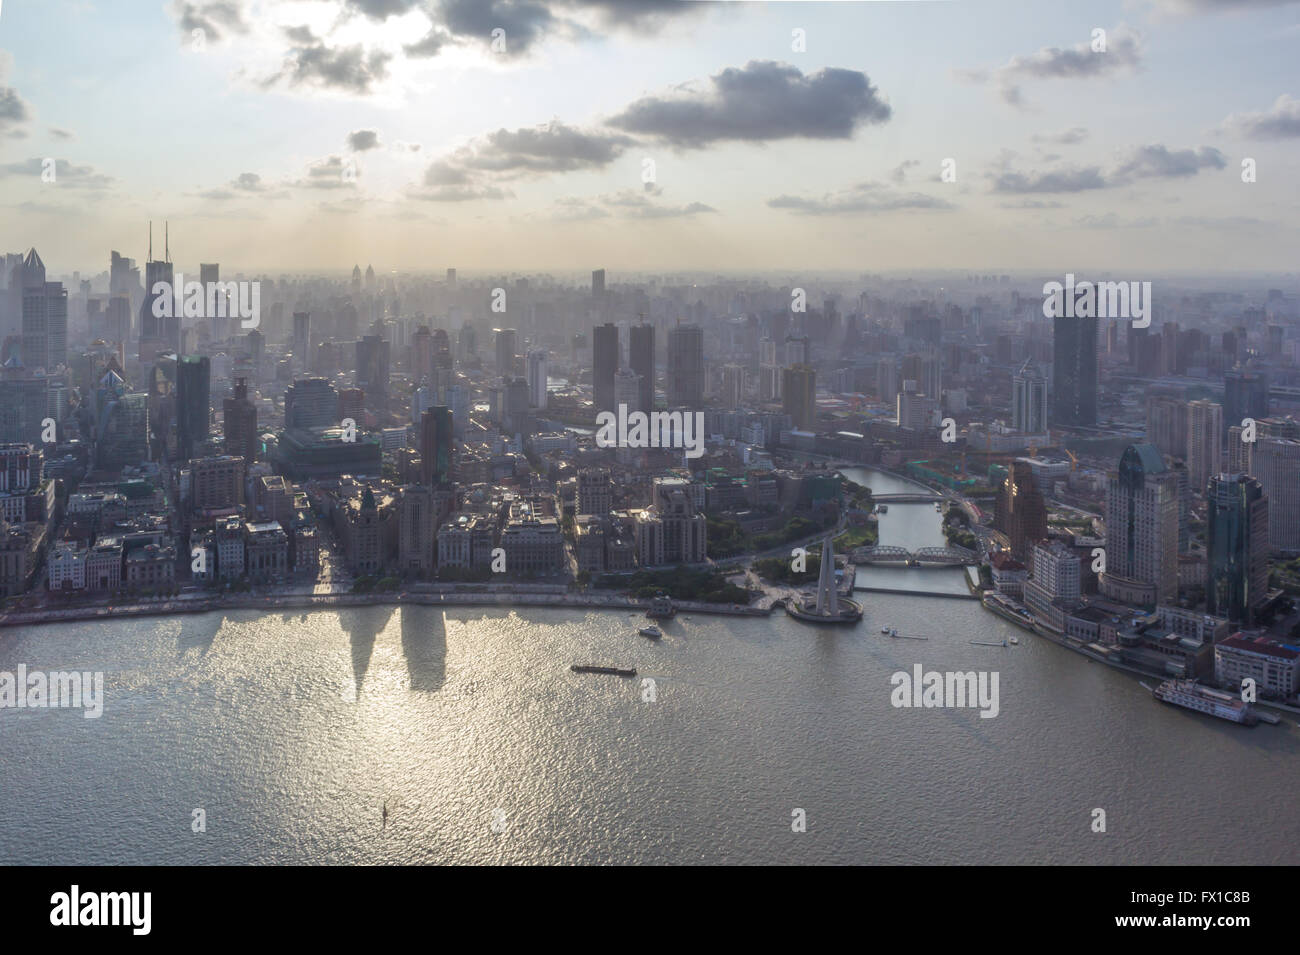 Shanghai city scape with boats in river. Picture was taken in 2014 close to sunset. Stock Photo